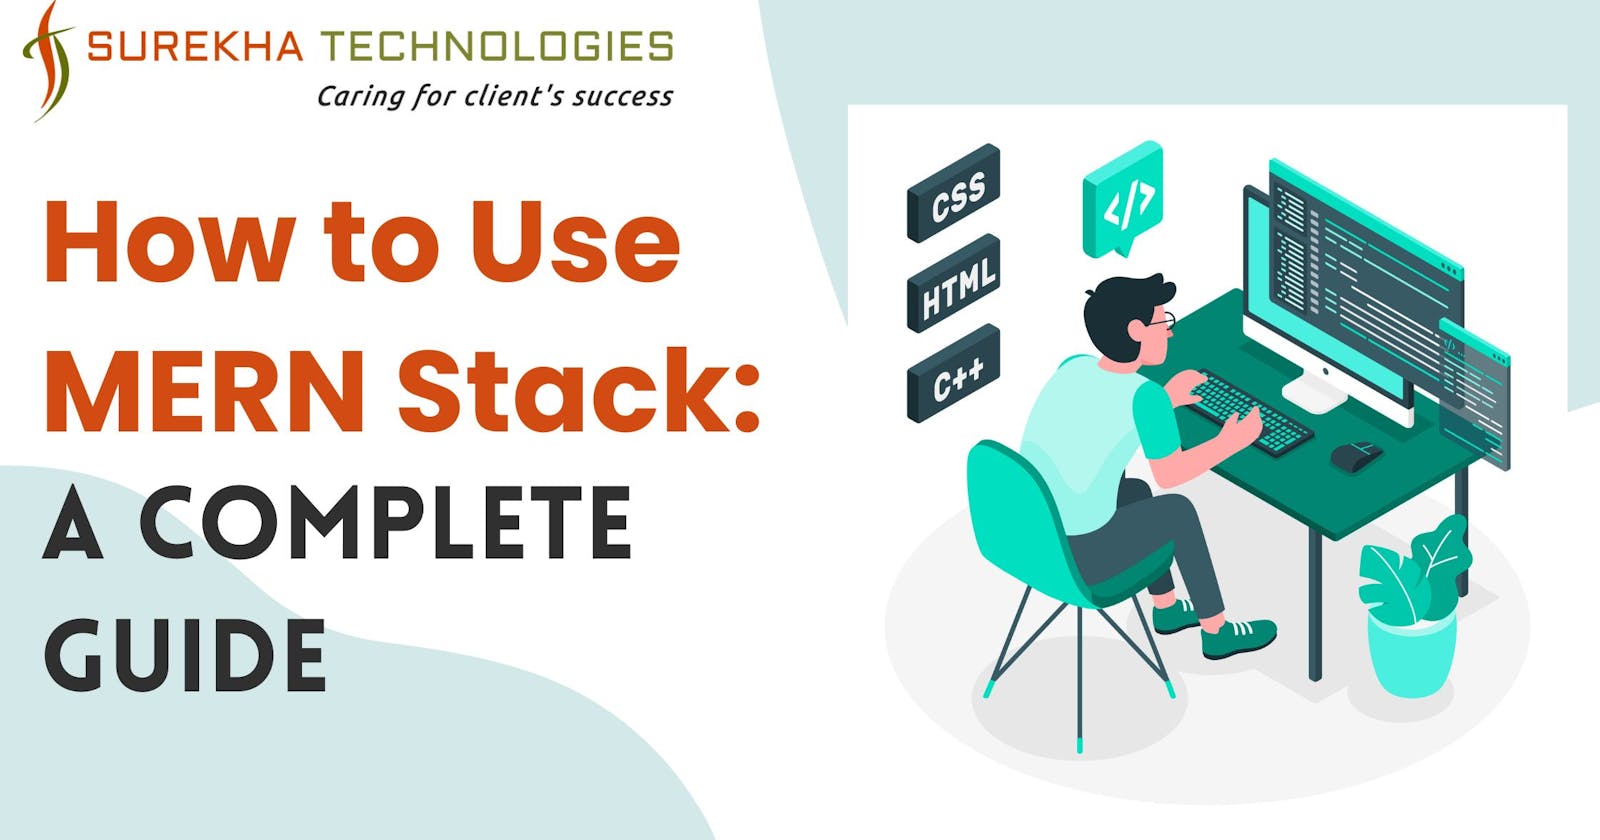 How to Use MERN Stack: A Complete Guide